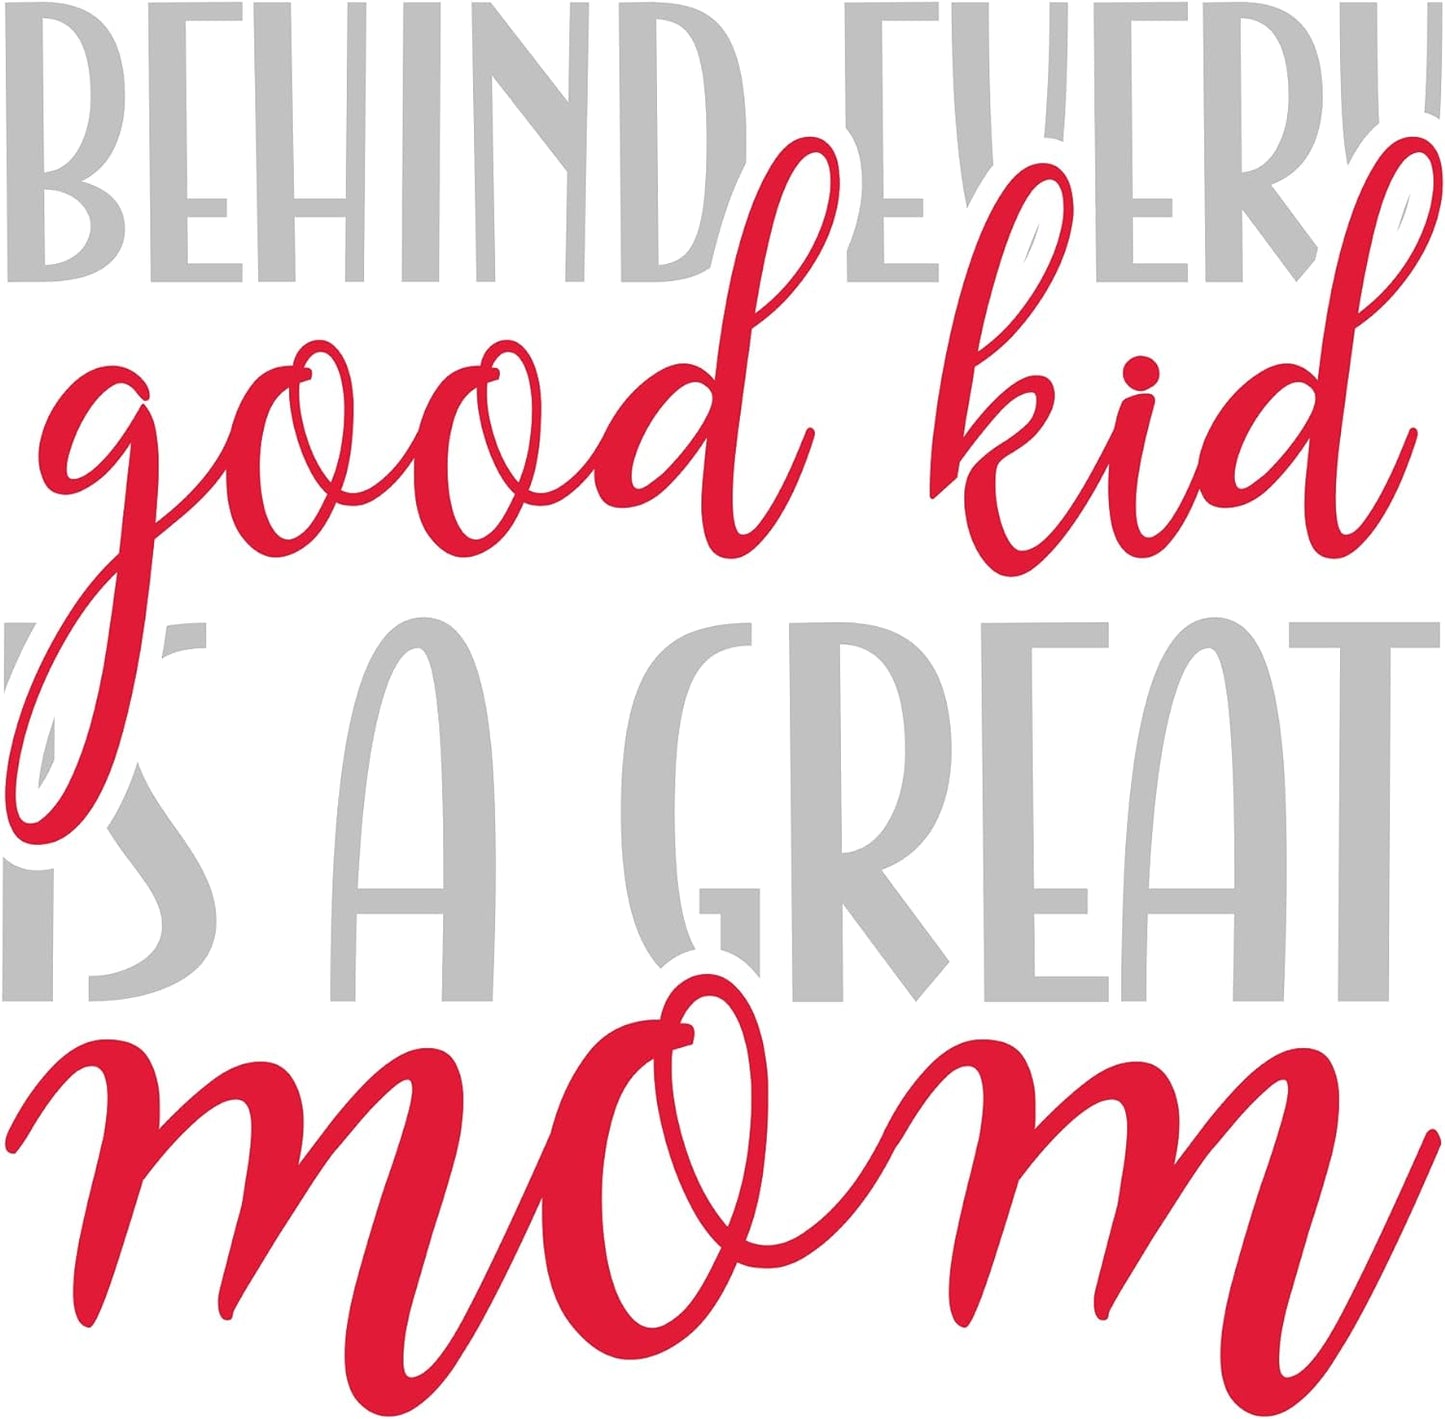 Inspirational Quote "Behind Every Kid is A Great Mom" Motivational Sticker Vinyl Decal Motivation Stickers- 5" Vinyl Sticker Waterproof